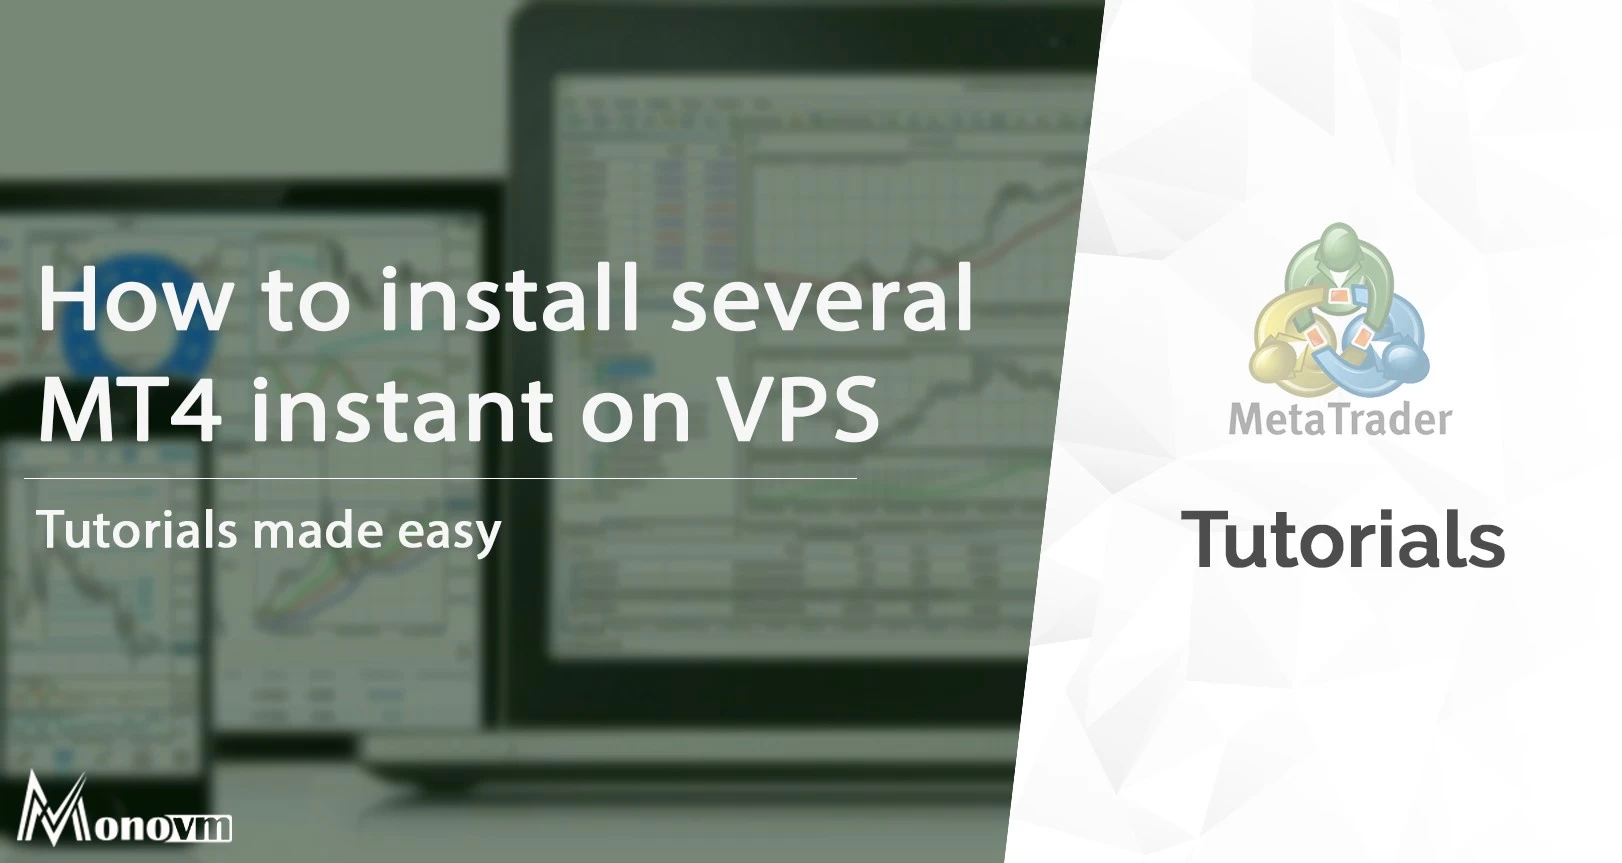 How to install several Meta Trader instant on VPS